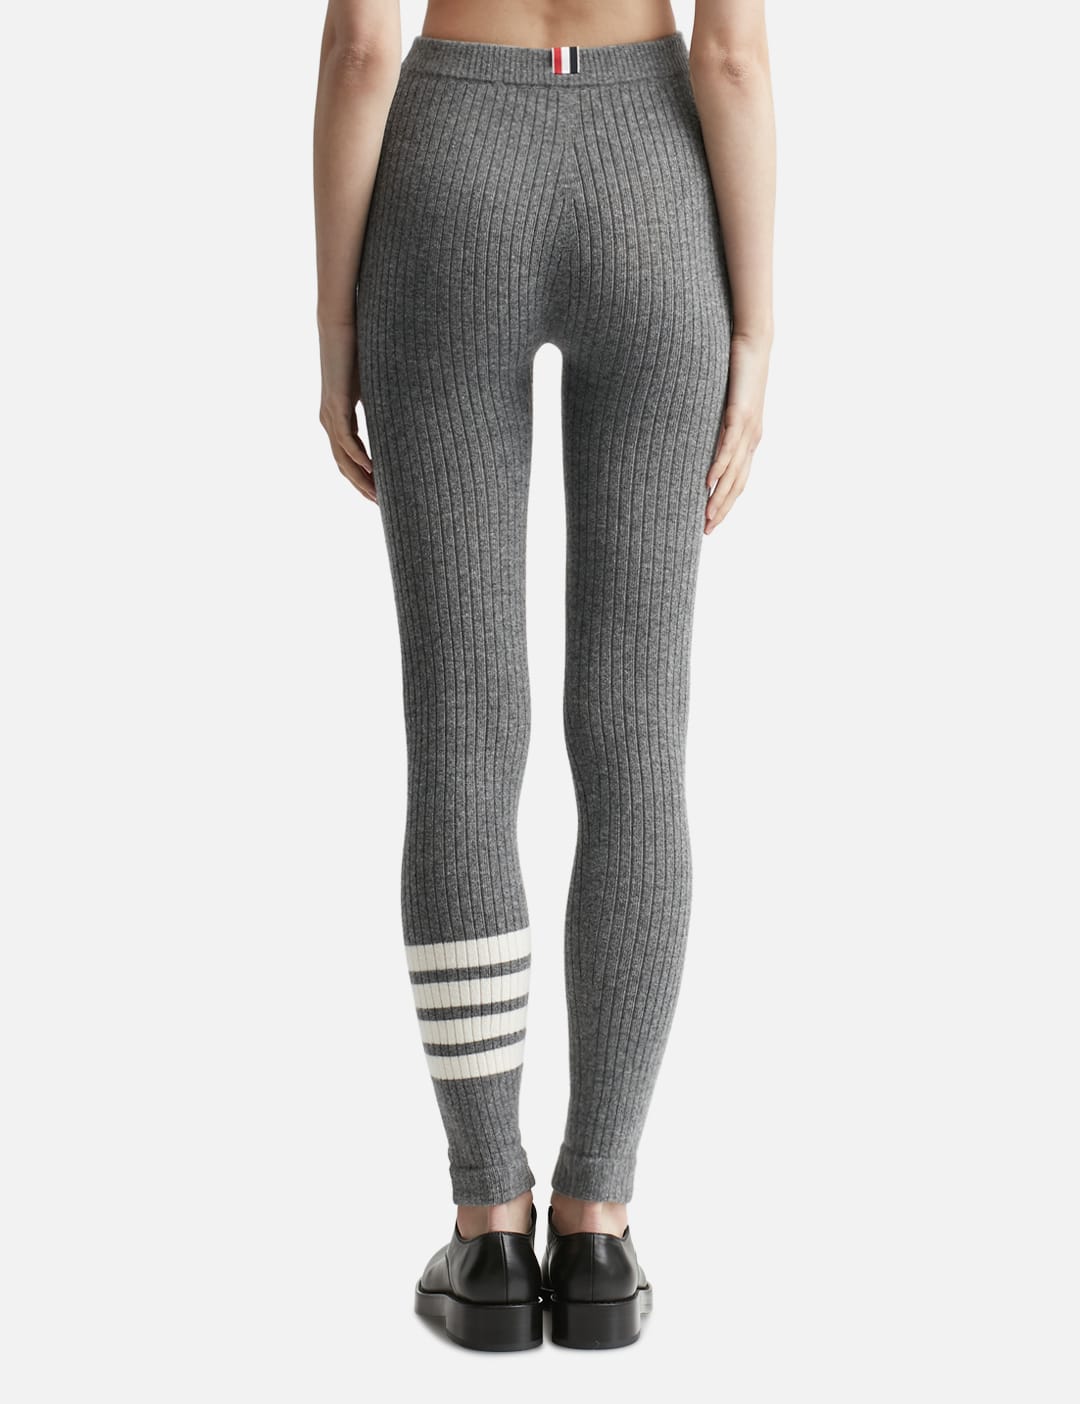 Thom Browne - Striped Knit Leggings | HBX - Globally Curated